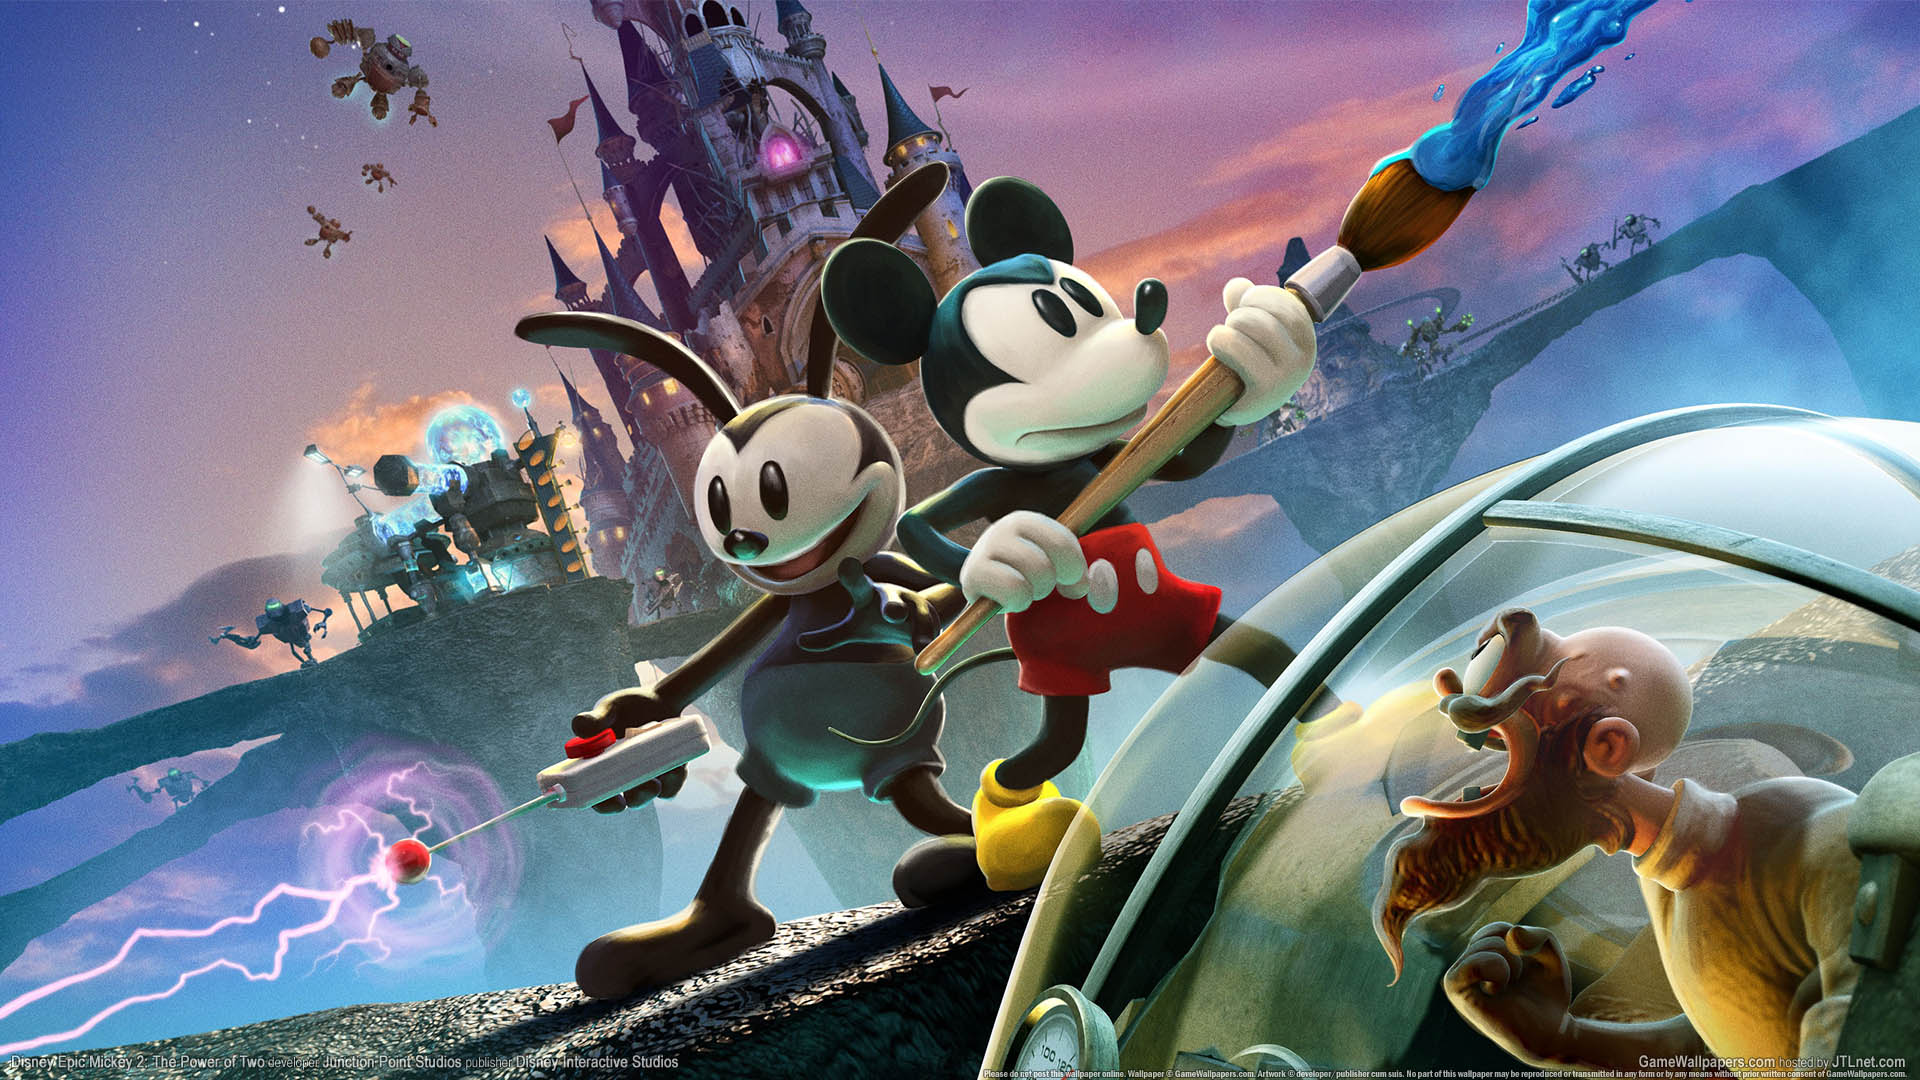 Disney Epic Mickey 2: The Power of Two achtergrond 01 1920x1080